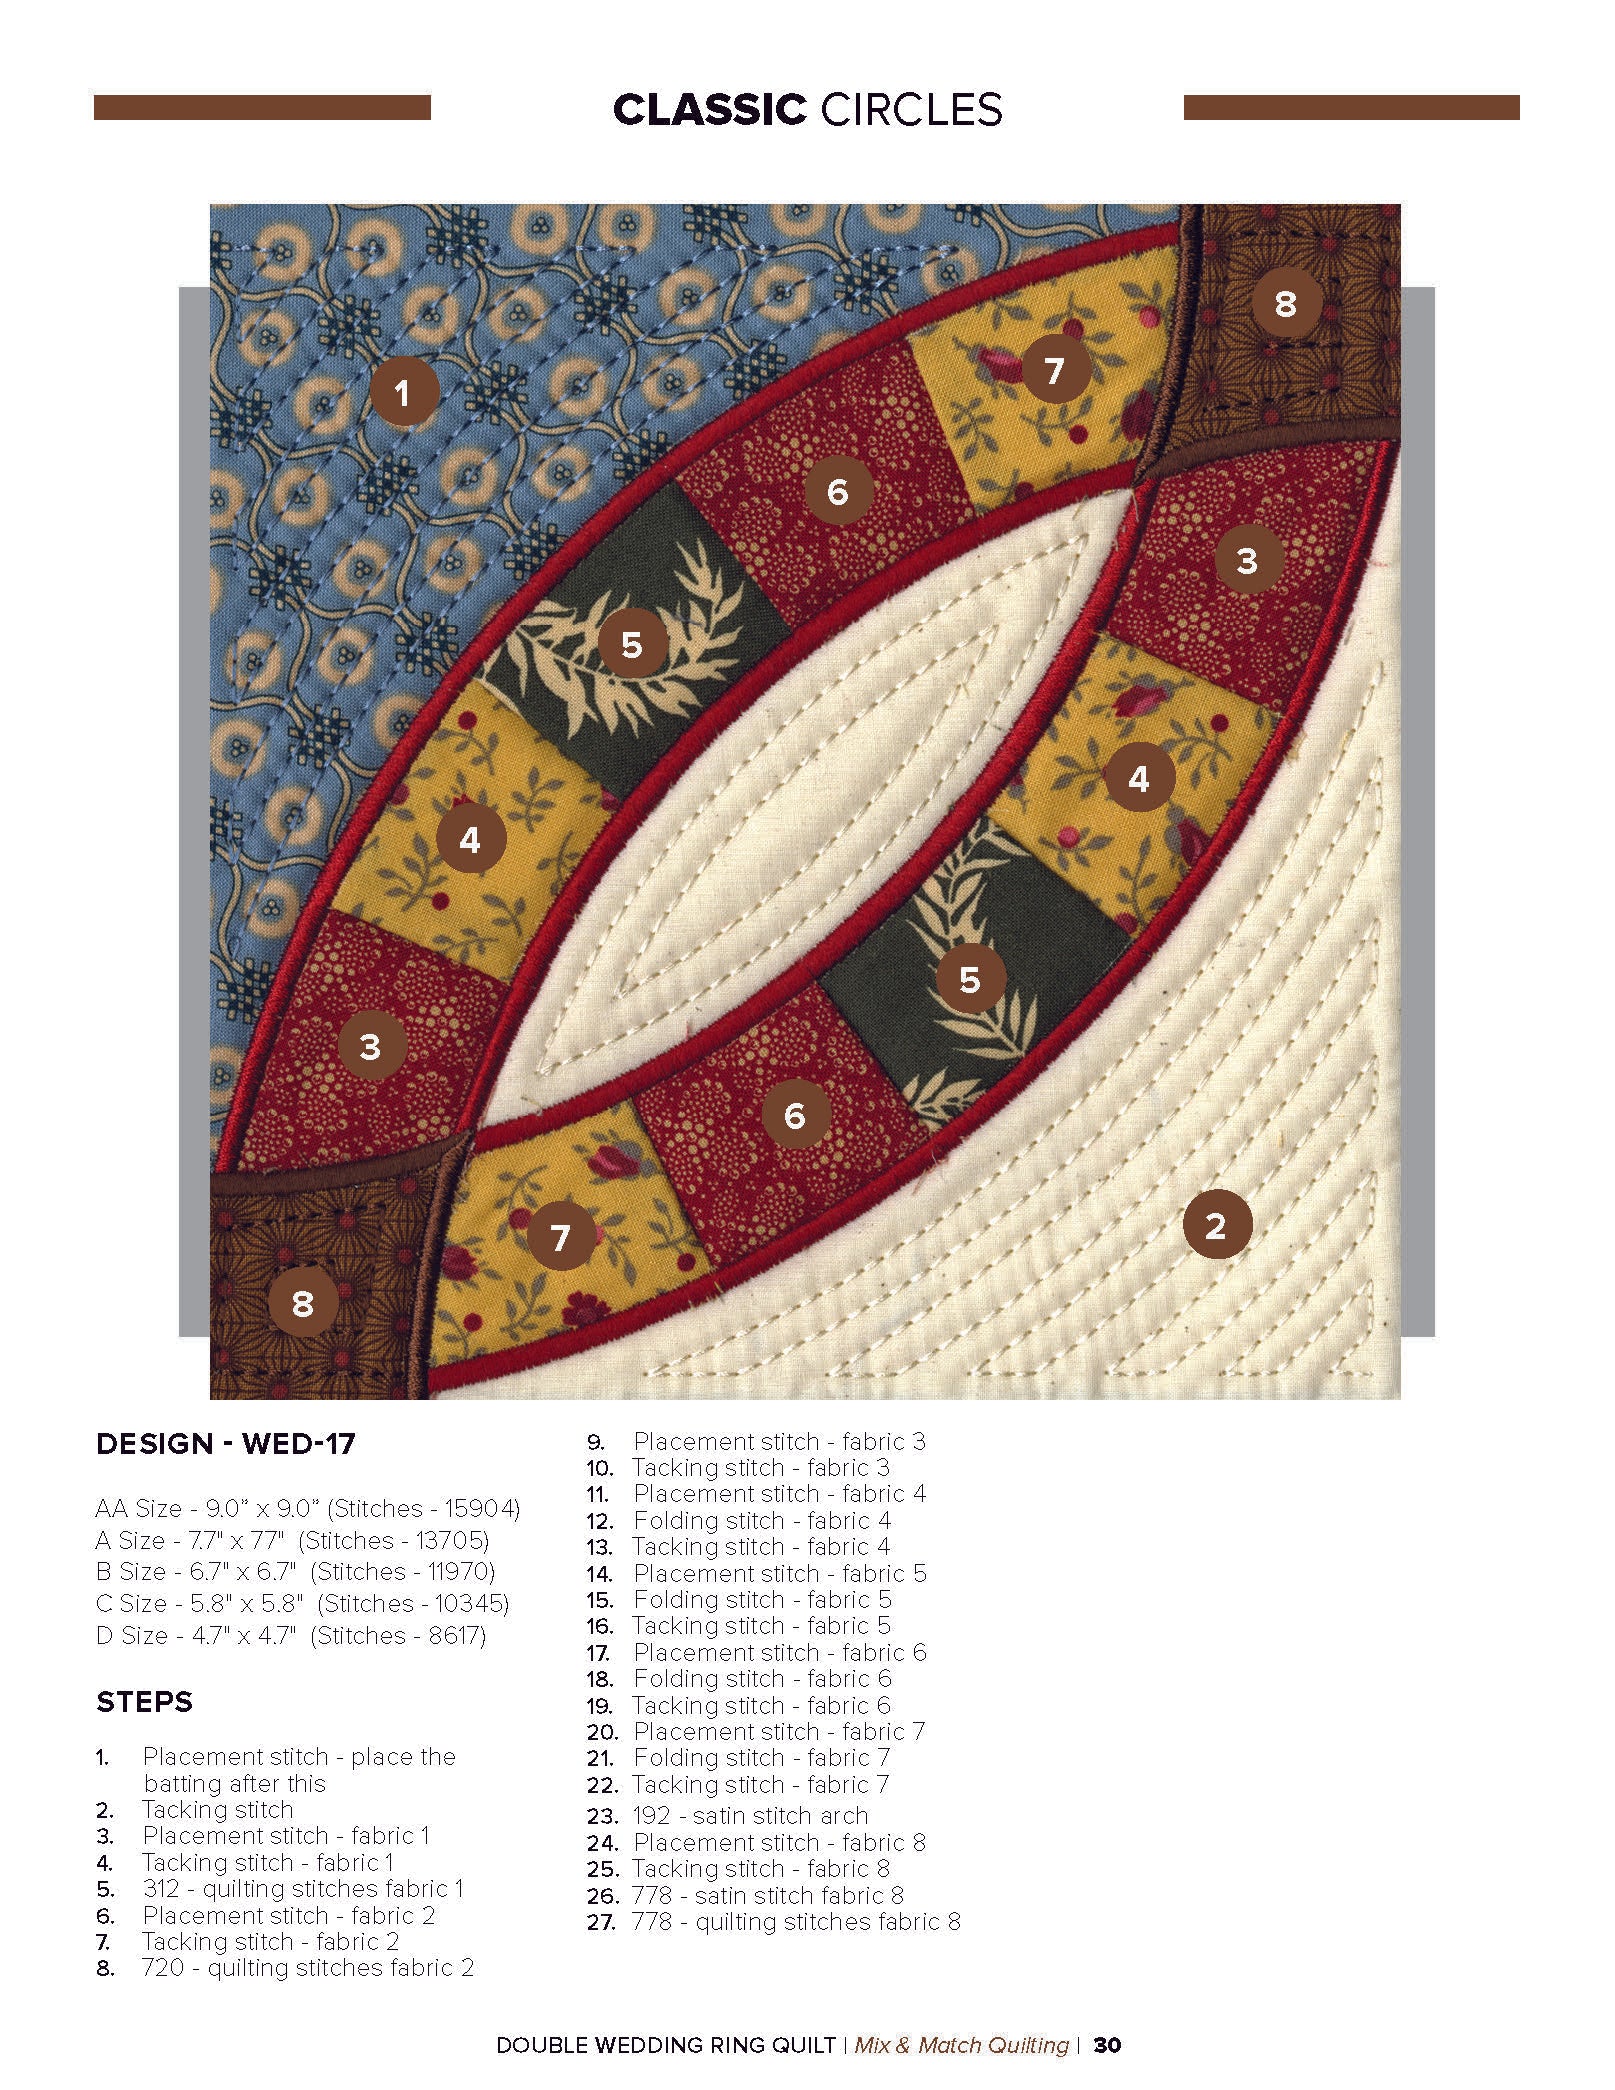 Pam's quilt. Double wedding ring quilt. DWR.  Longarm quilting designs,  Double wedding ring quilt, Quilting designs